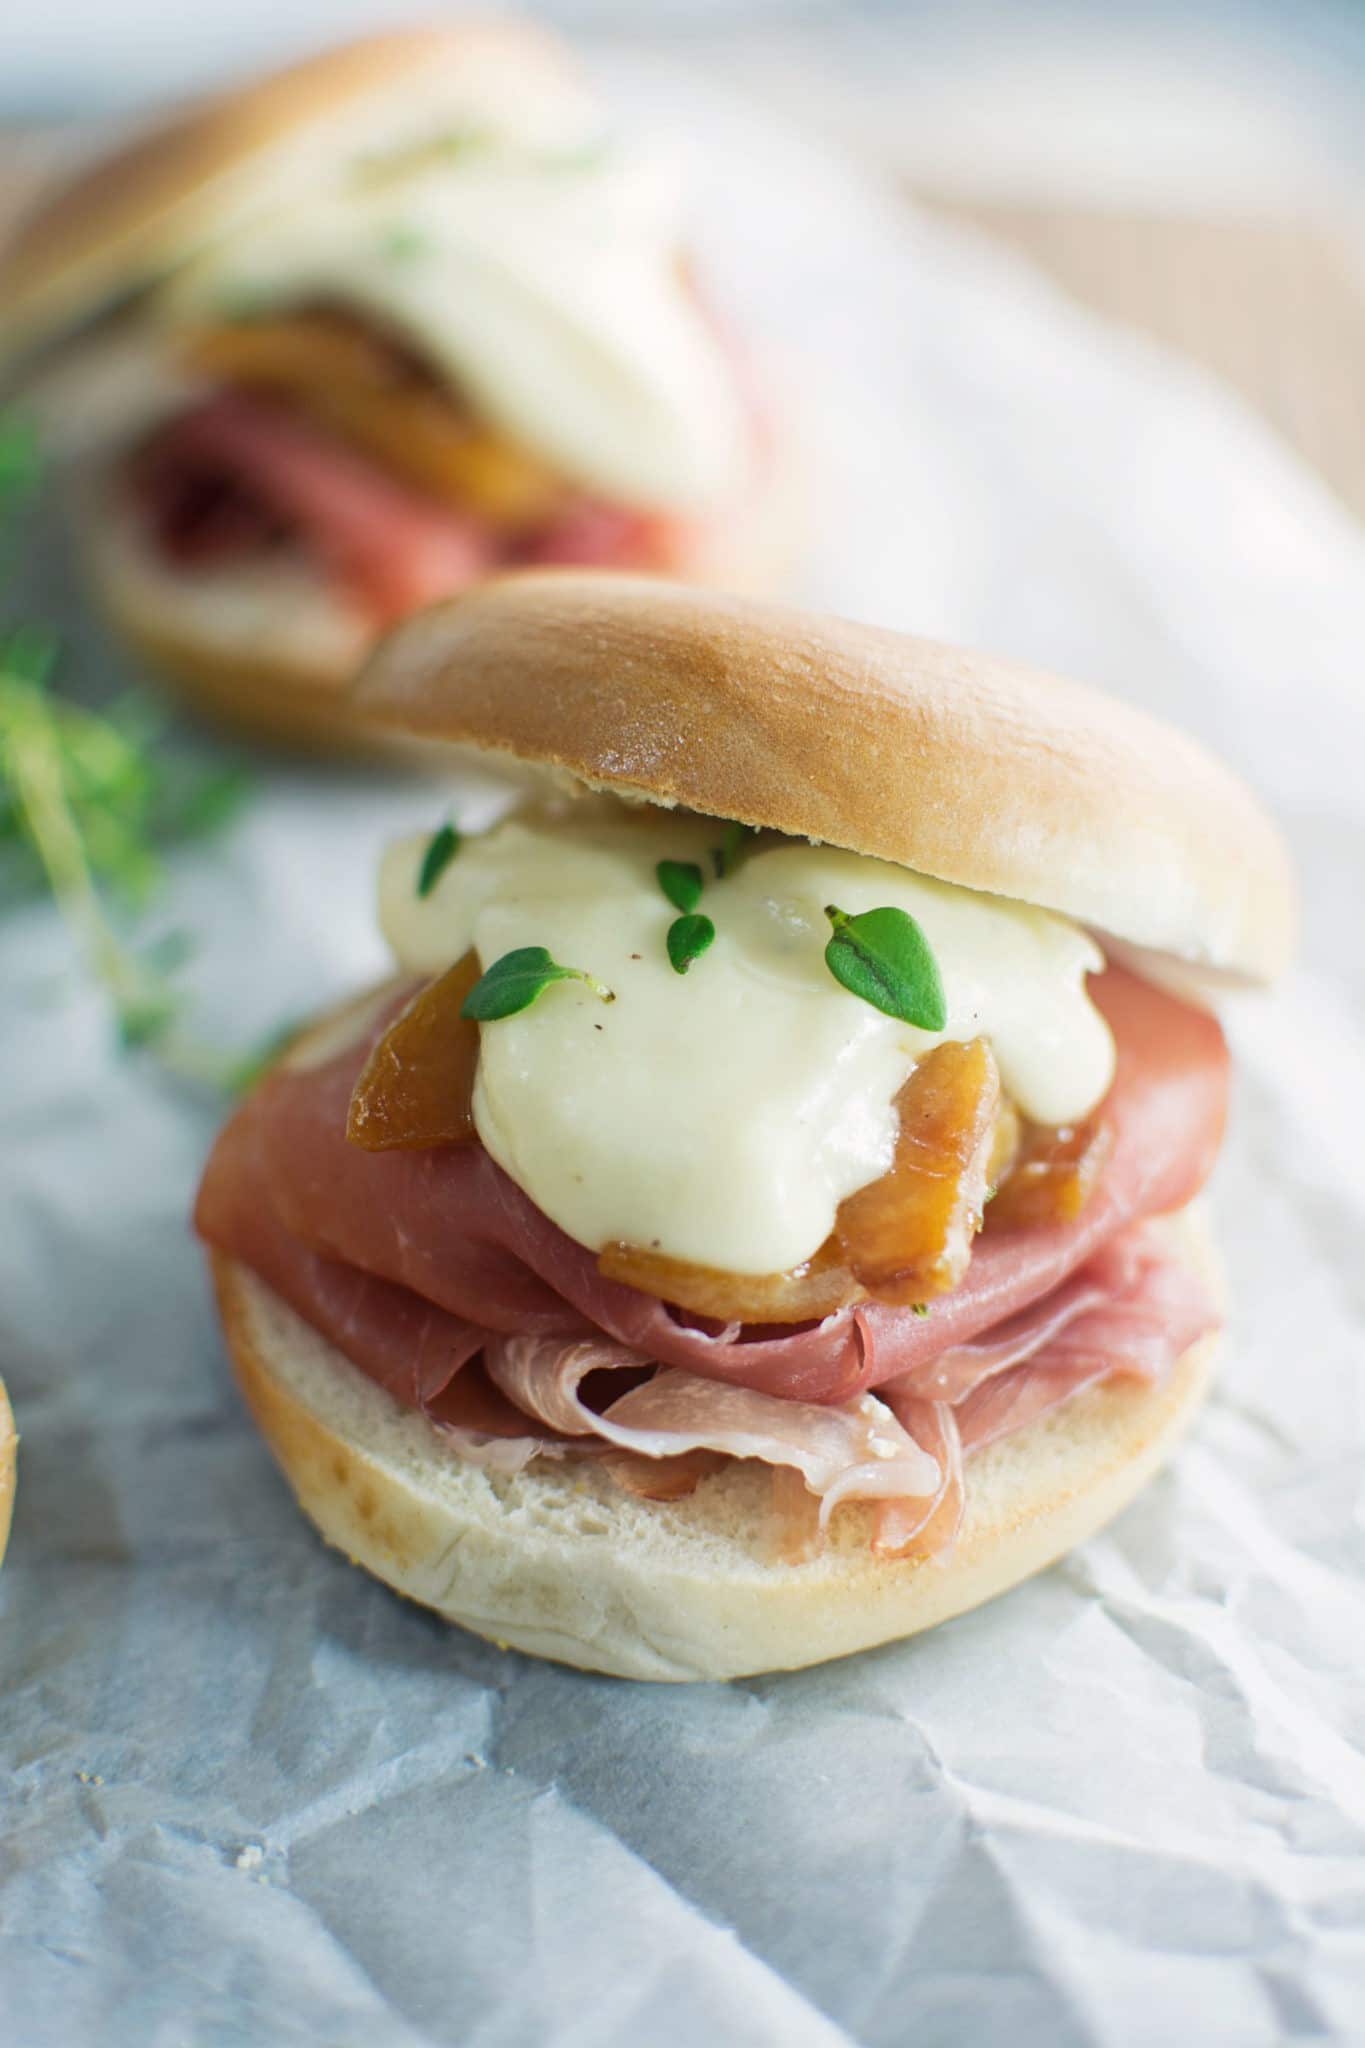 Prosciutto & peaches with a creamy brie sauce make these delectable Bagel Sliders - Find the #recipe @LittleFiggyFood